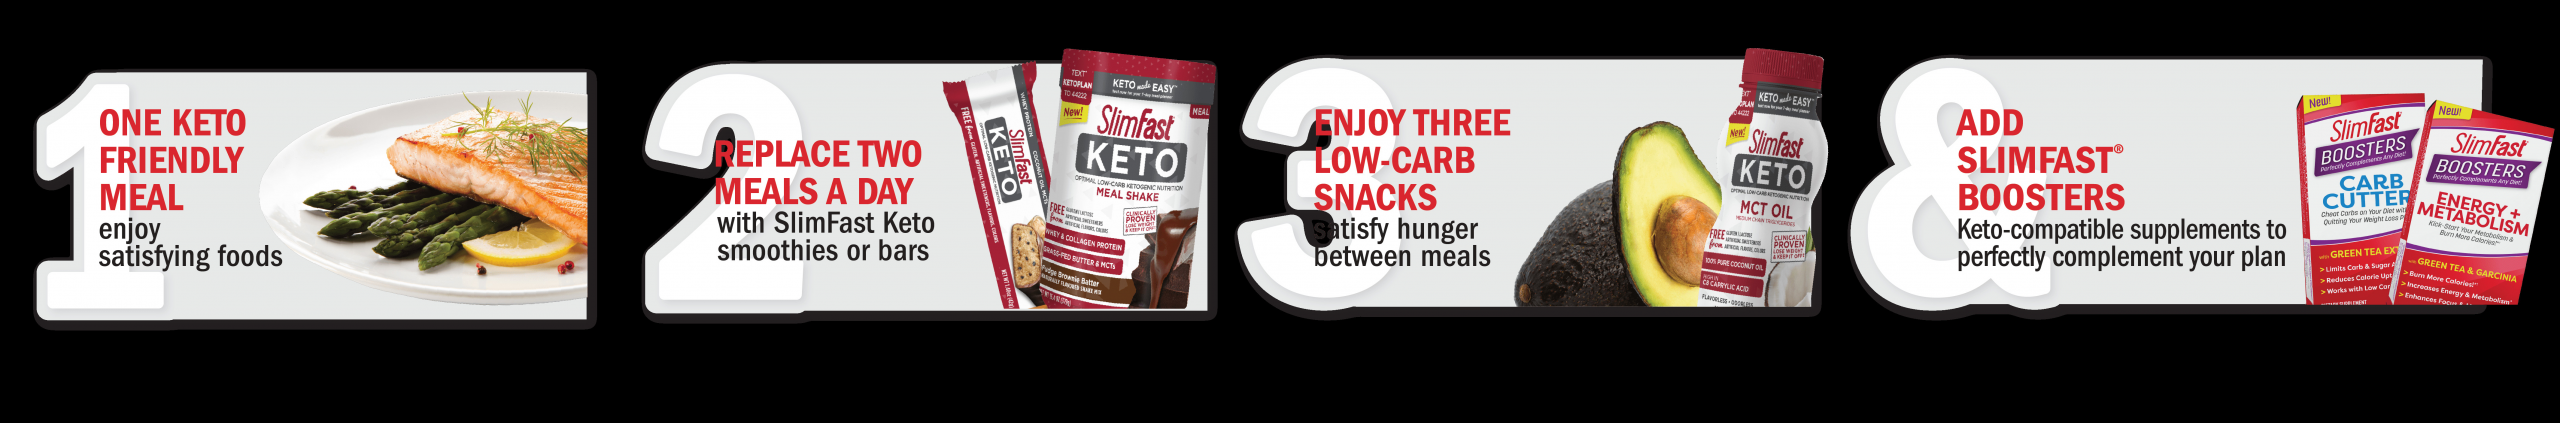 Slimfast Keto Diet Plan
 Keto Products Recipes & Quick Start Guide